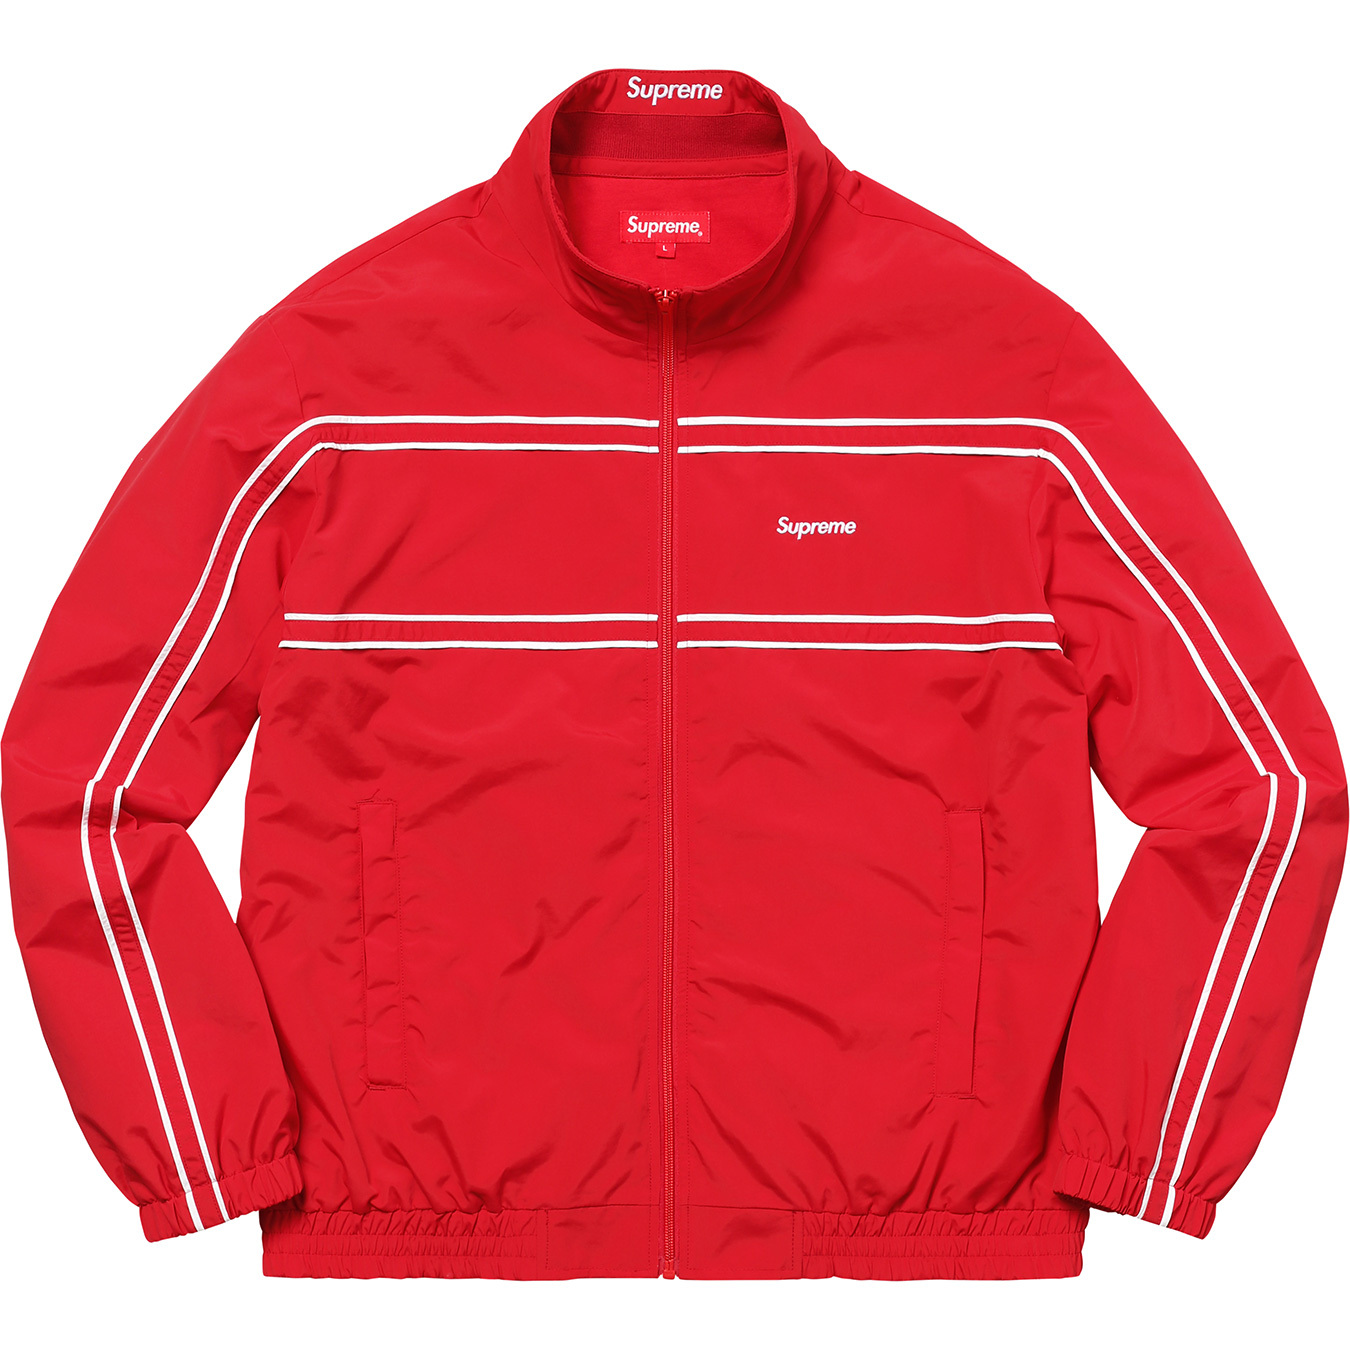 Supreme Piping Track Jacket Red - FW17 Men's - US